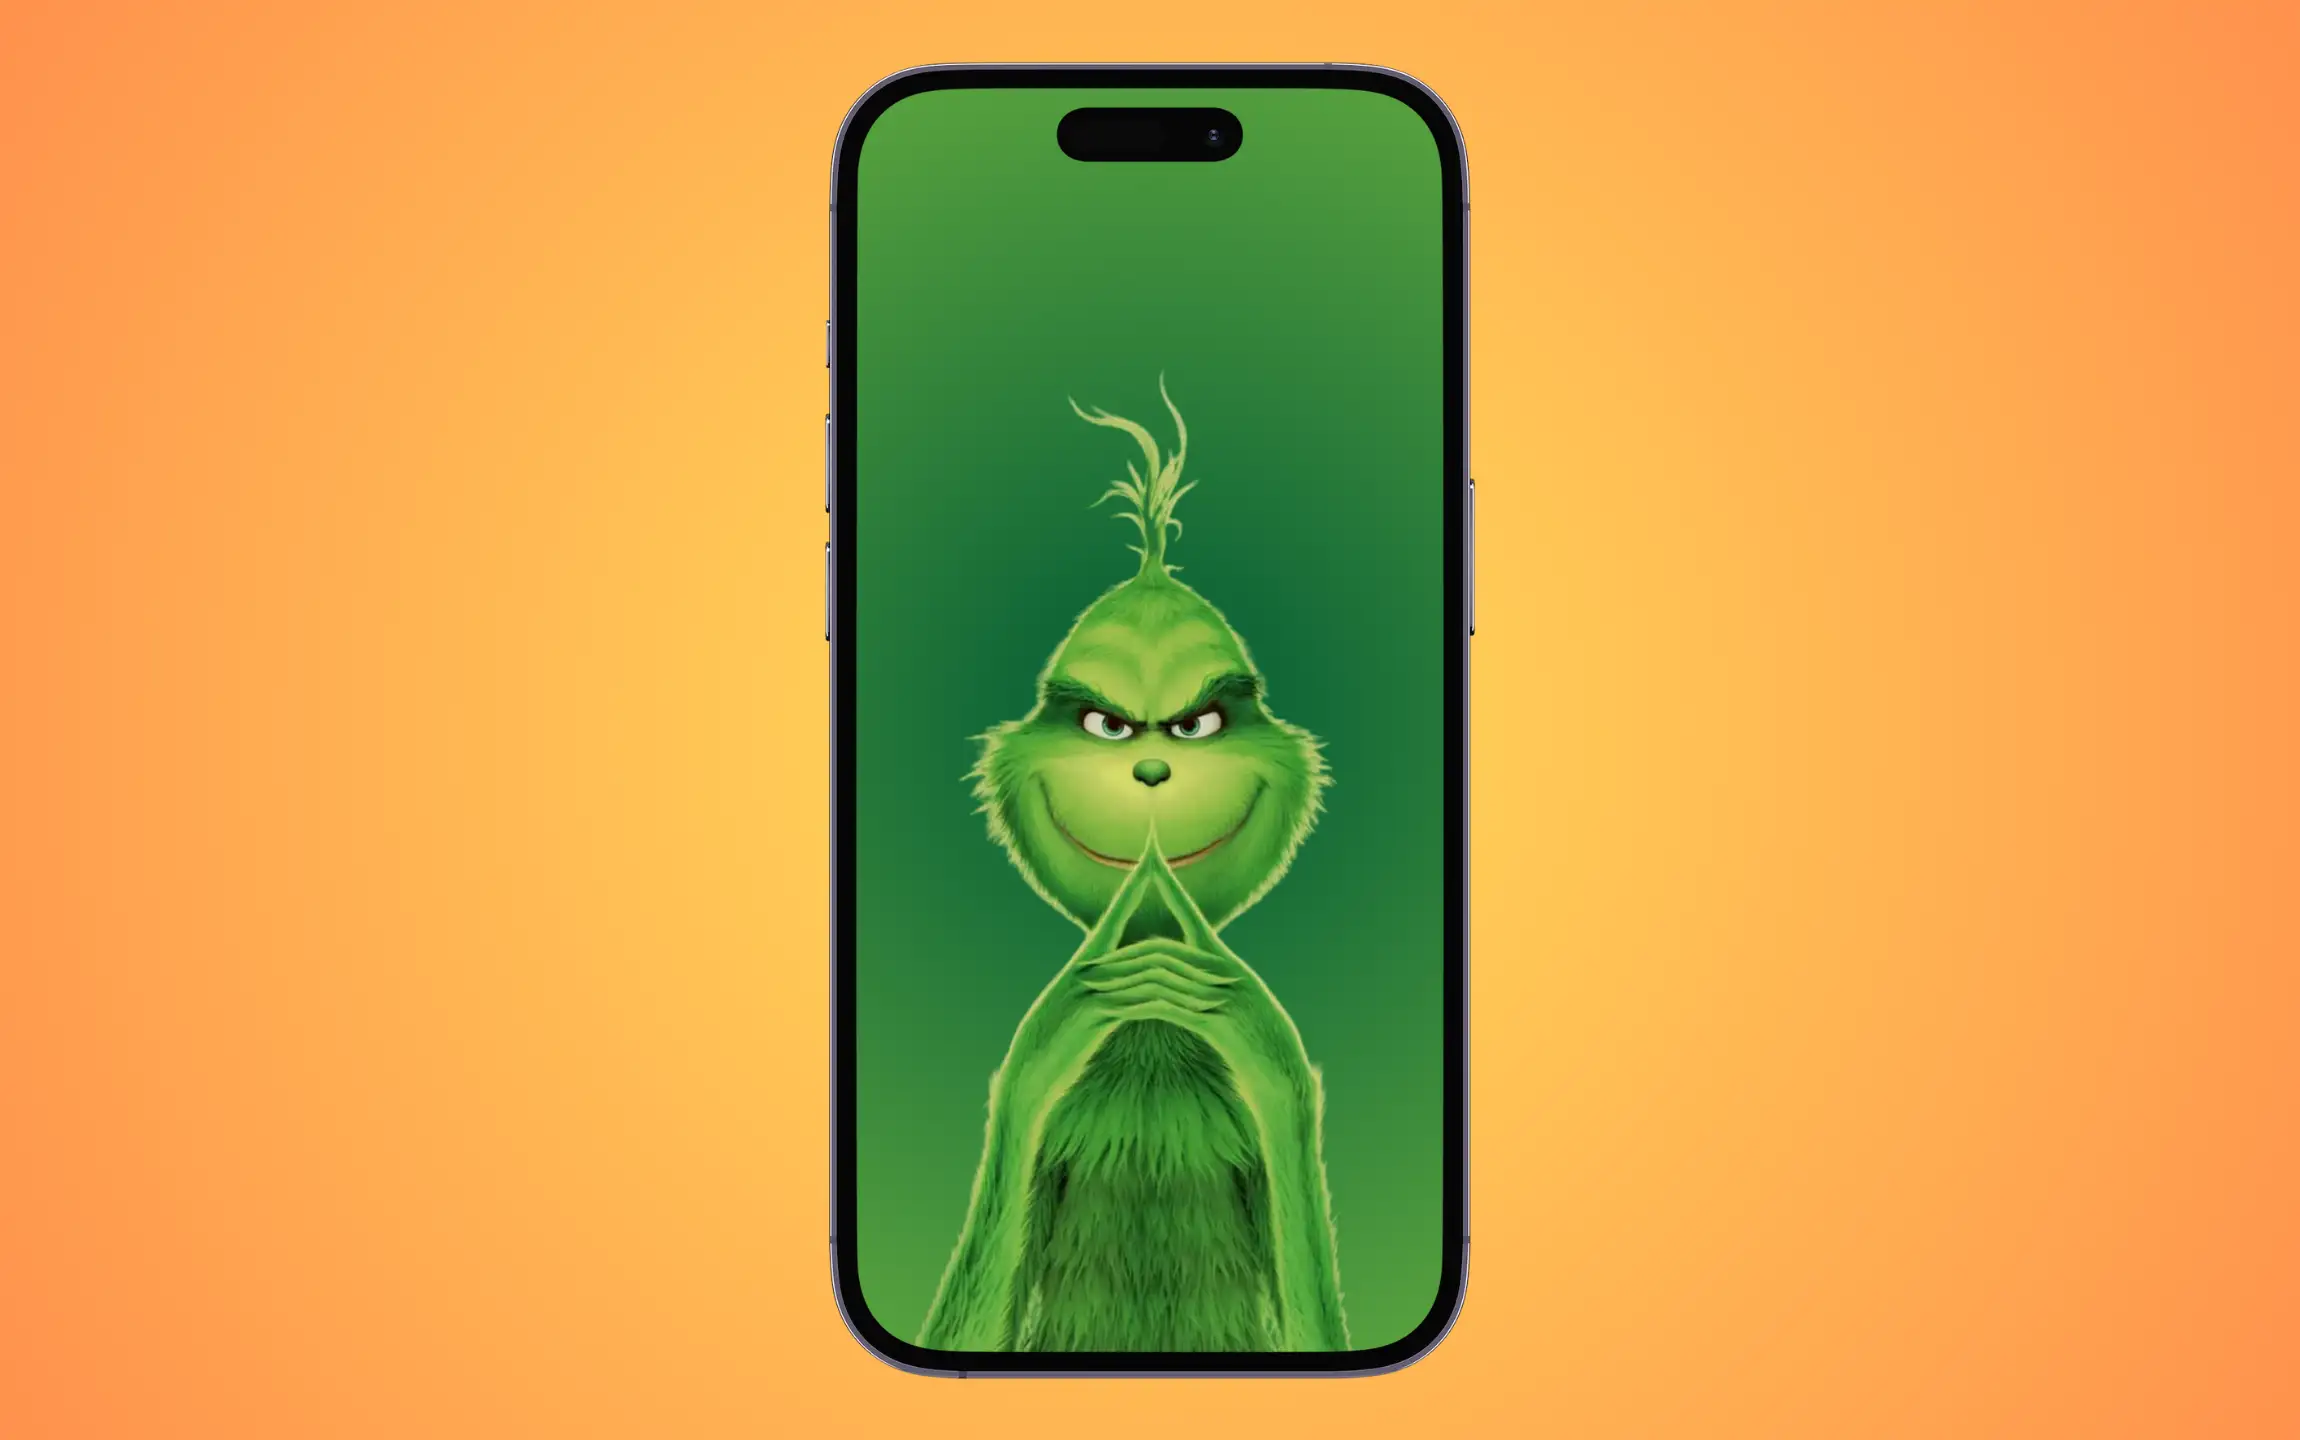 Grinch Serious face wallpaper for iPhone